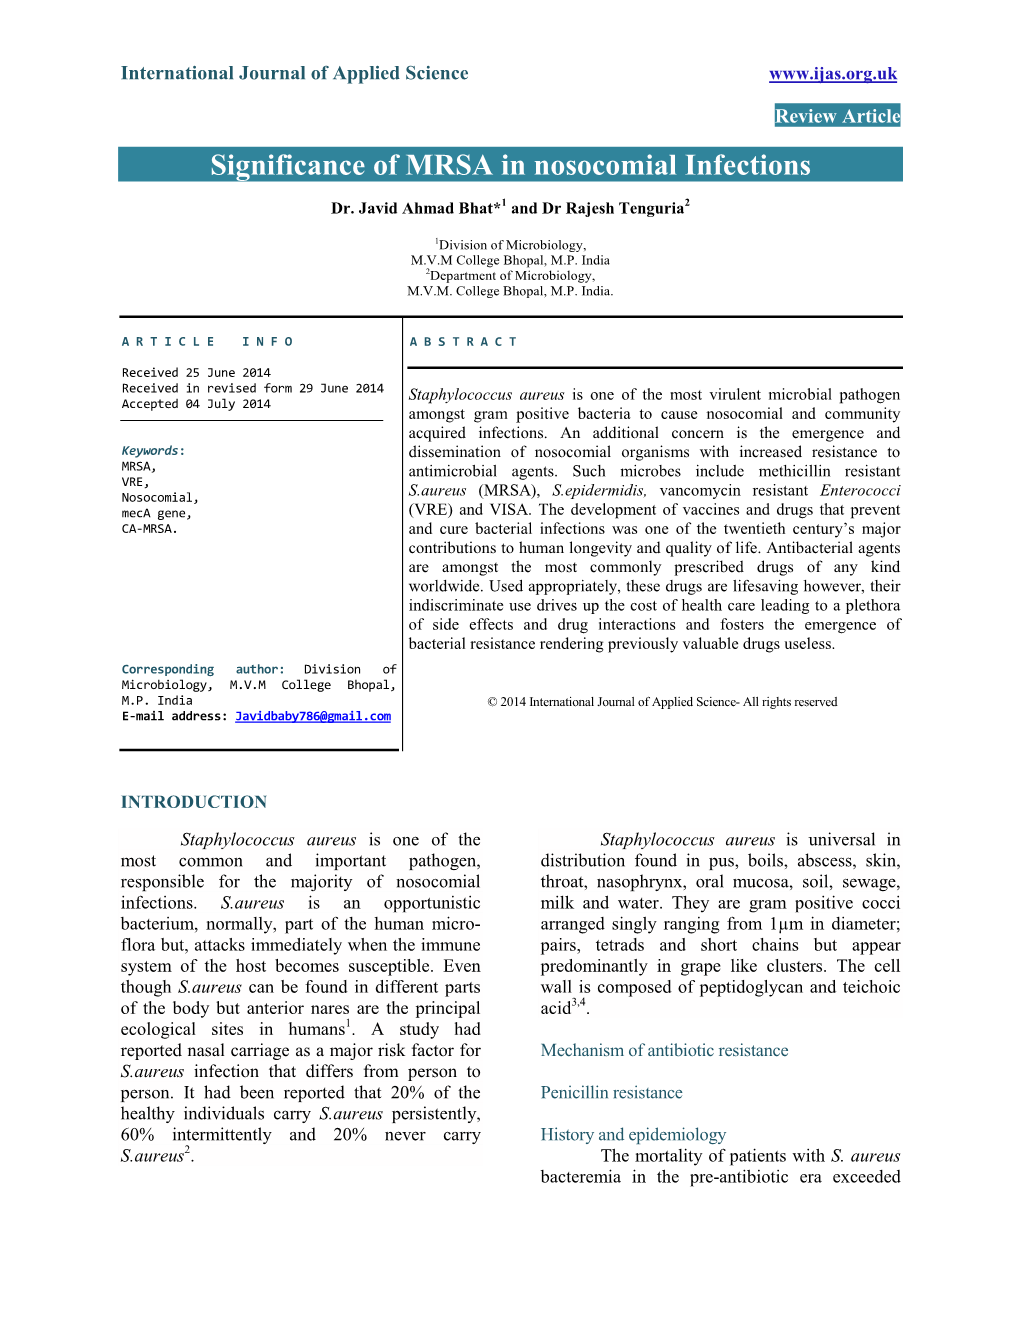 Significance of MRSA in Nosocomial Infections